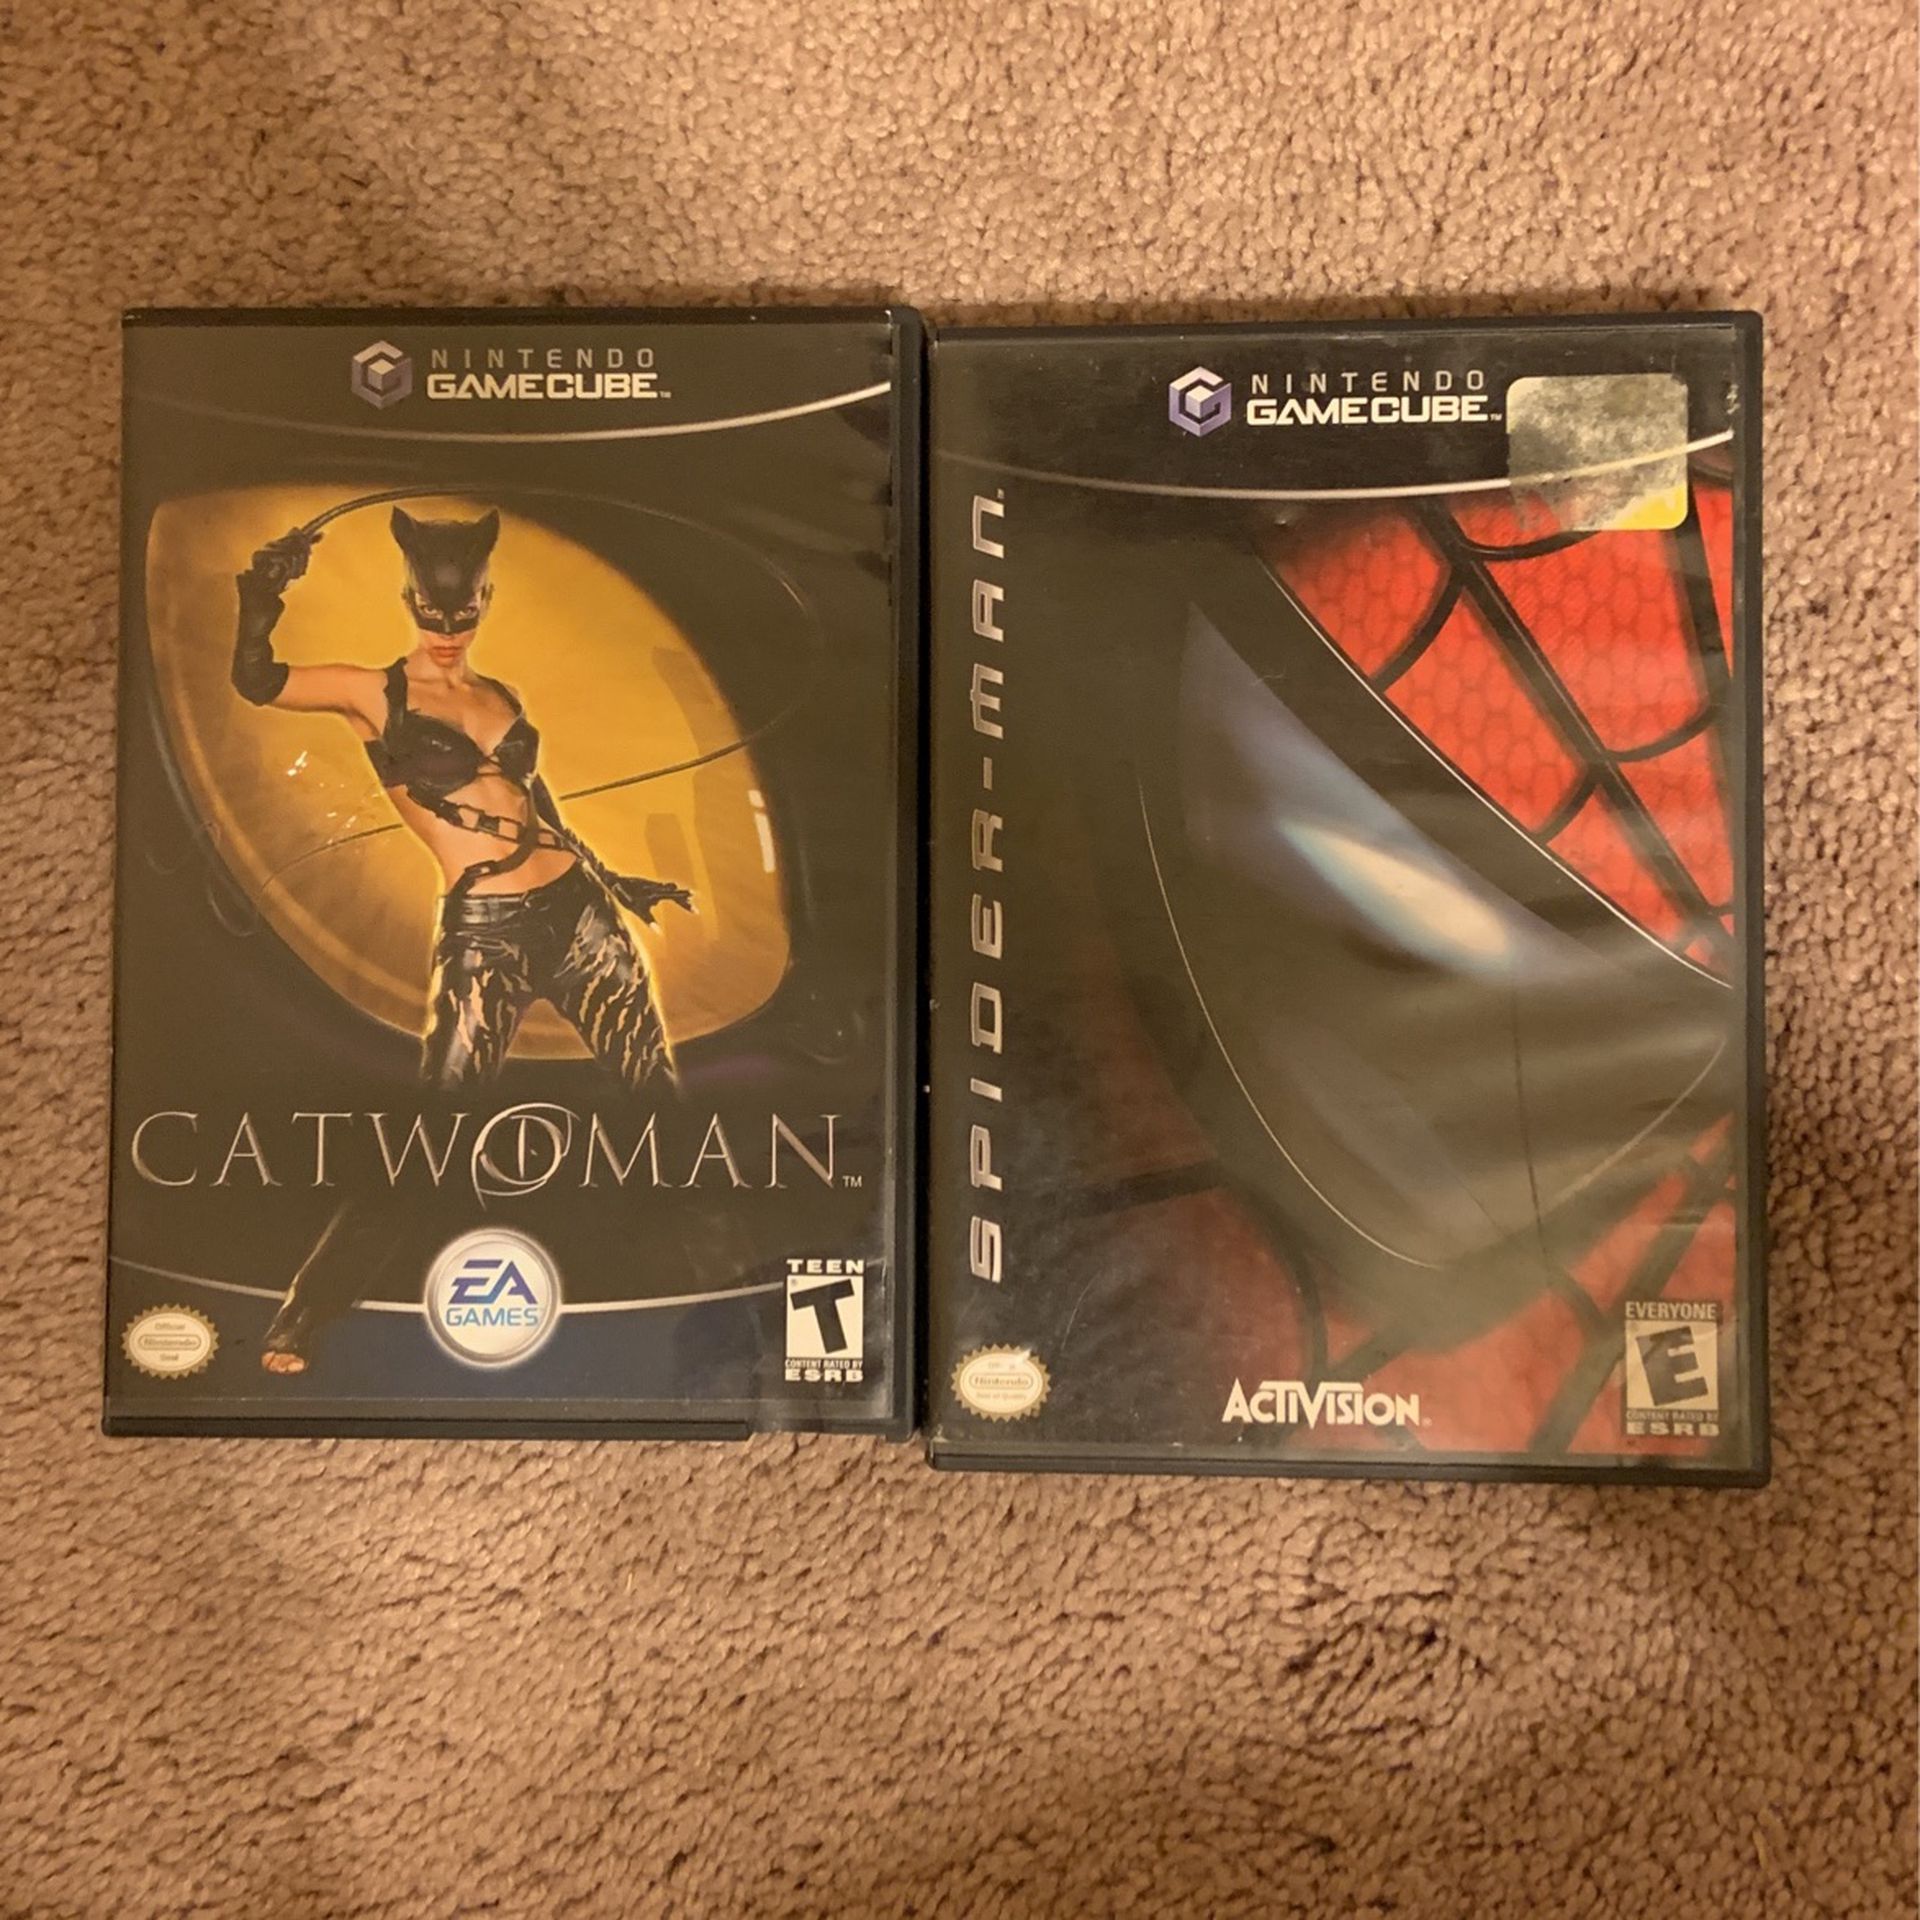 Cat woman and spider man gc games